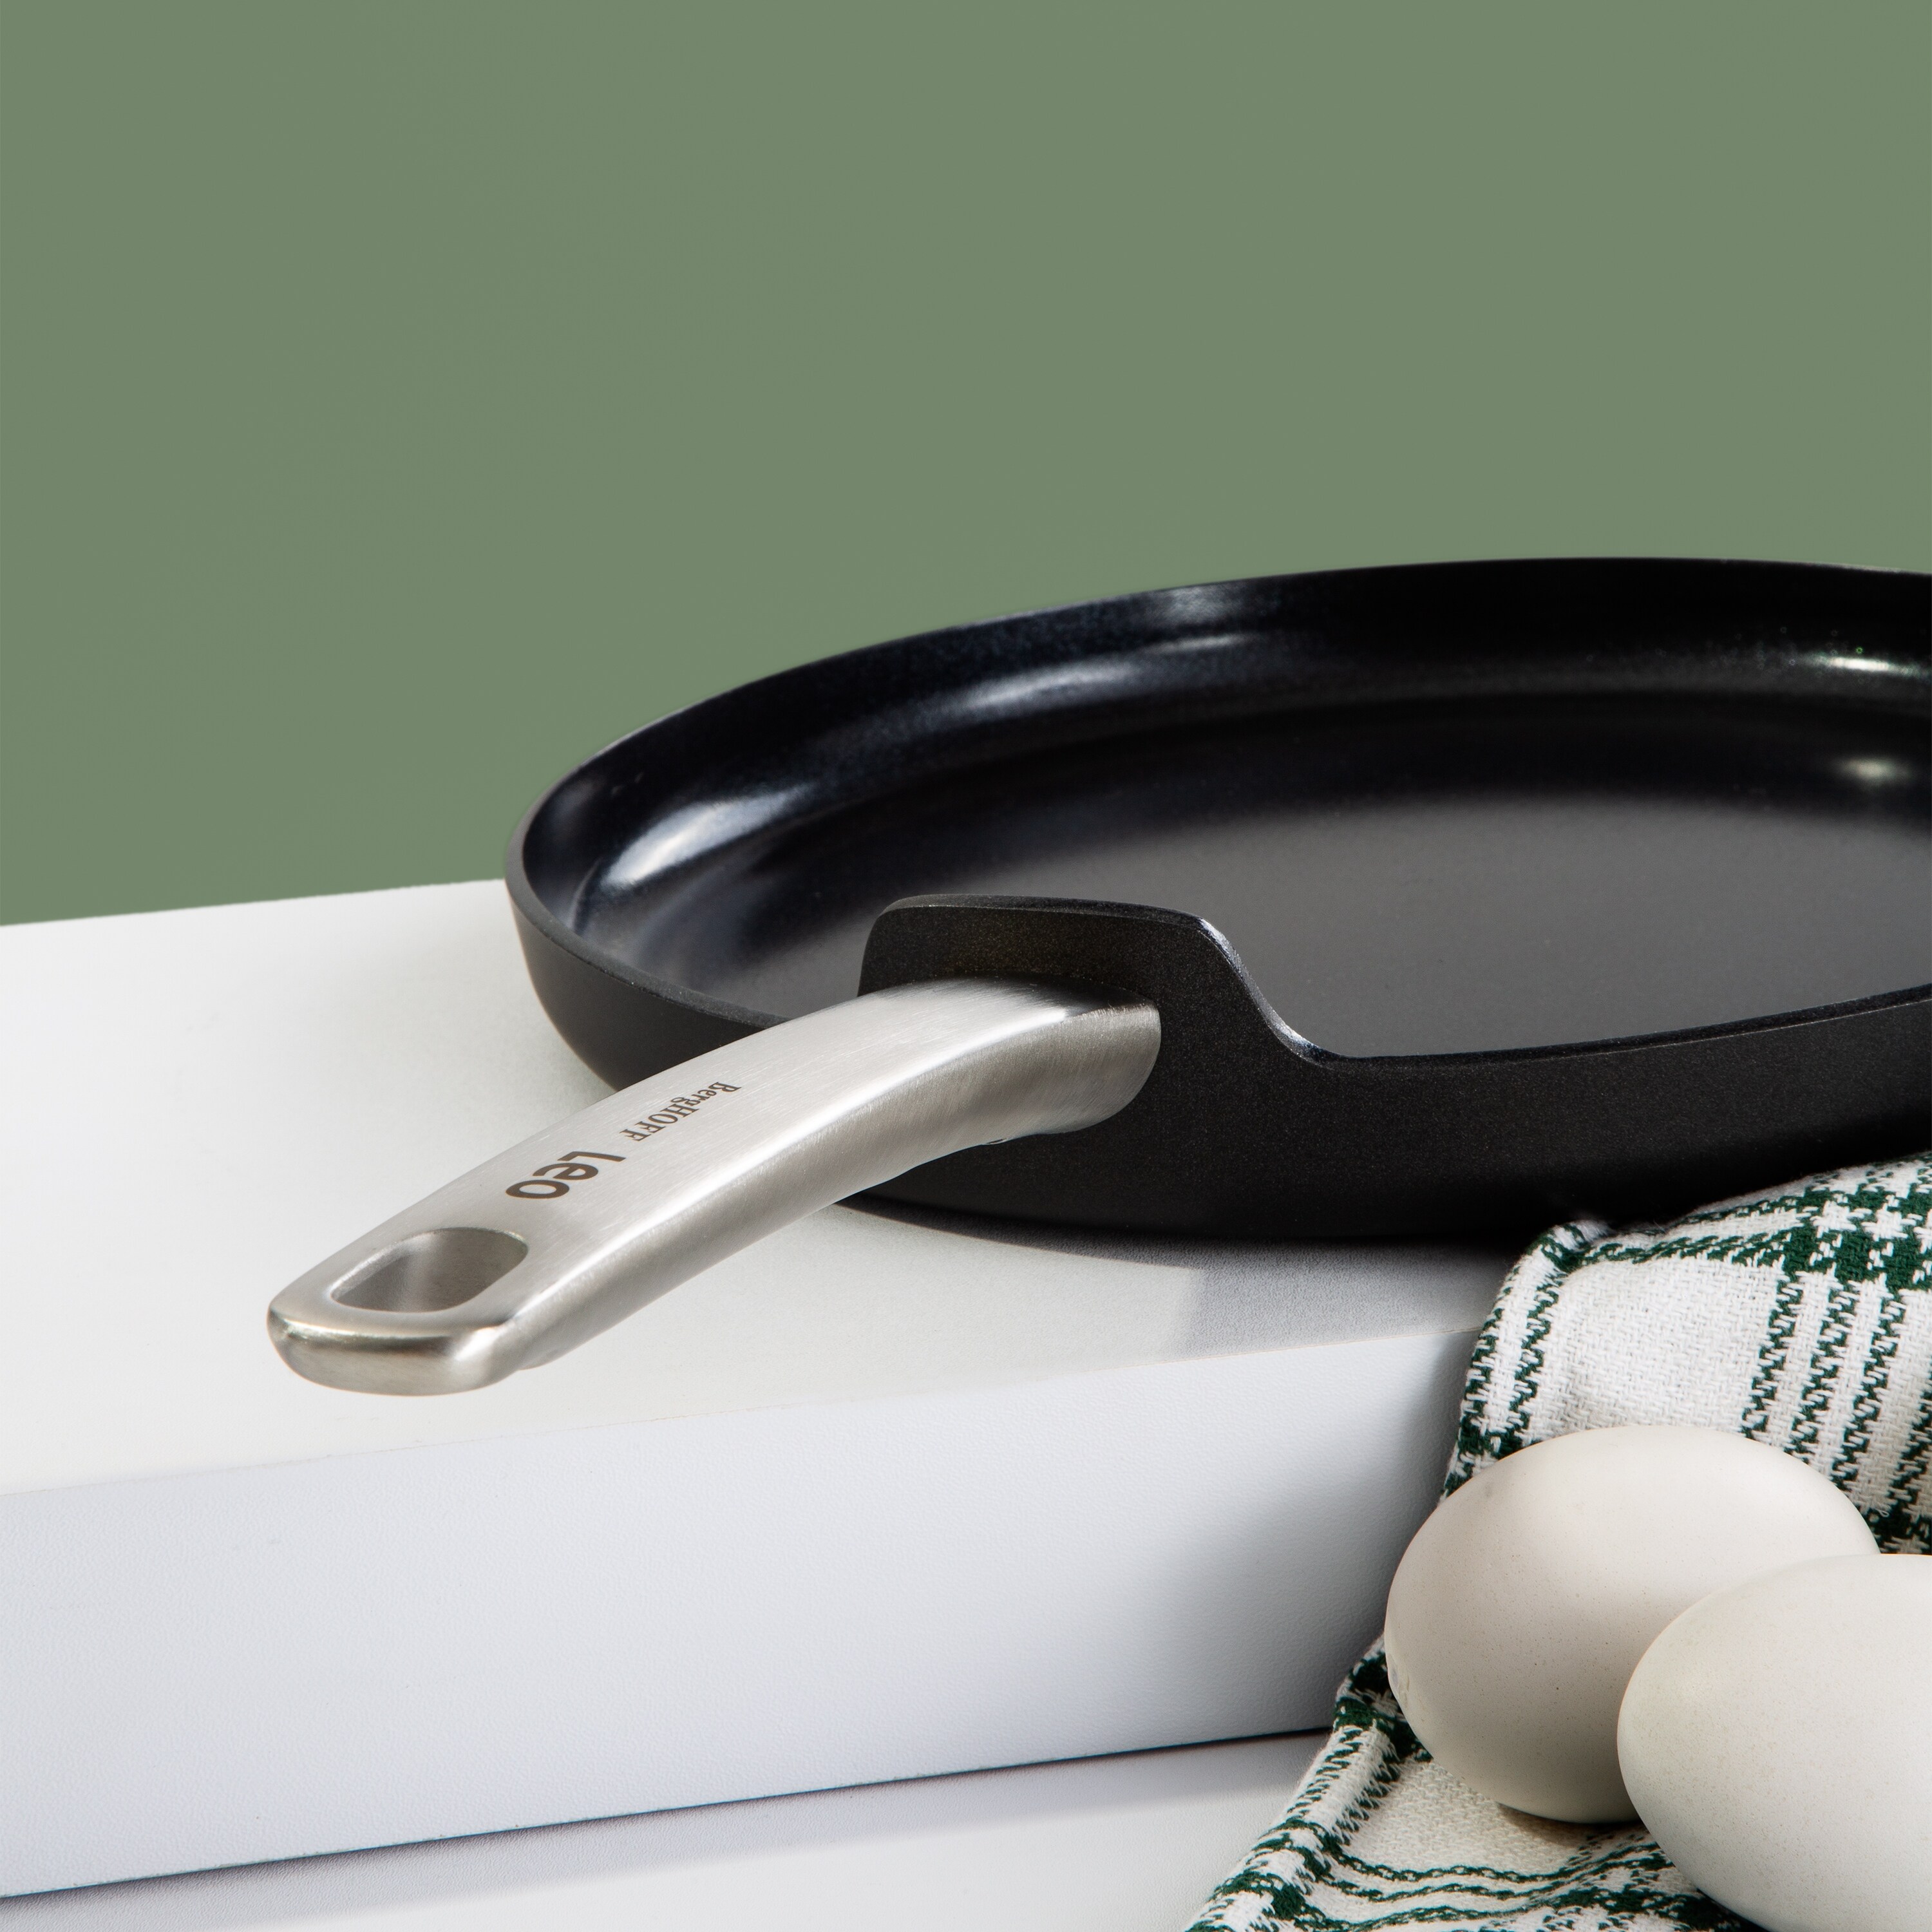 BergHOFF Balance Non-Stick Ceramic Frying Pan 9.5 and Nylon Turner Set, Recycled Material - Sage